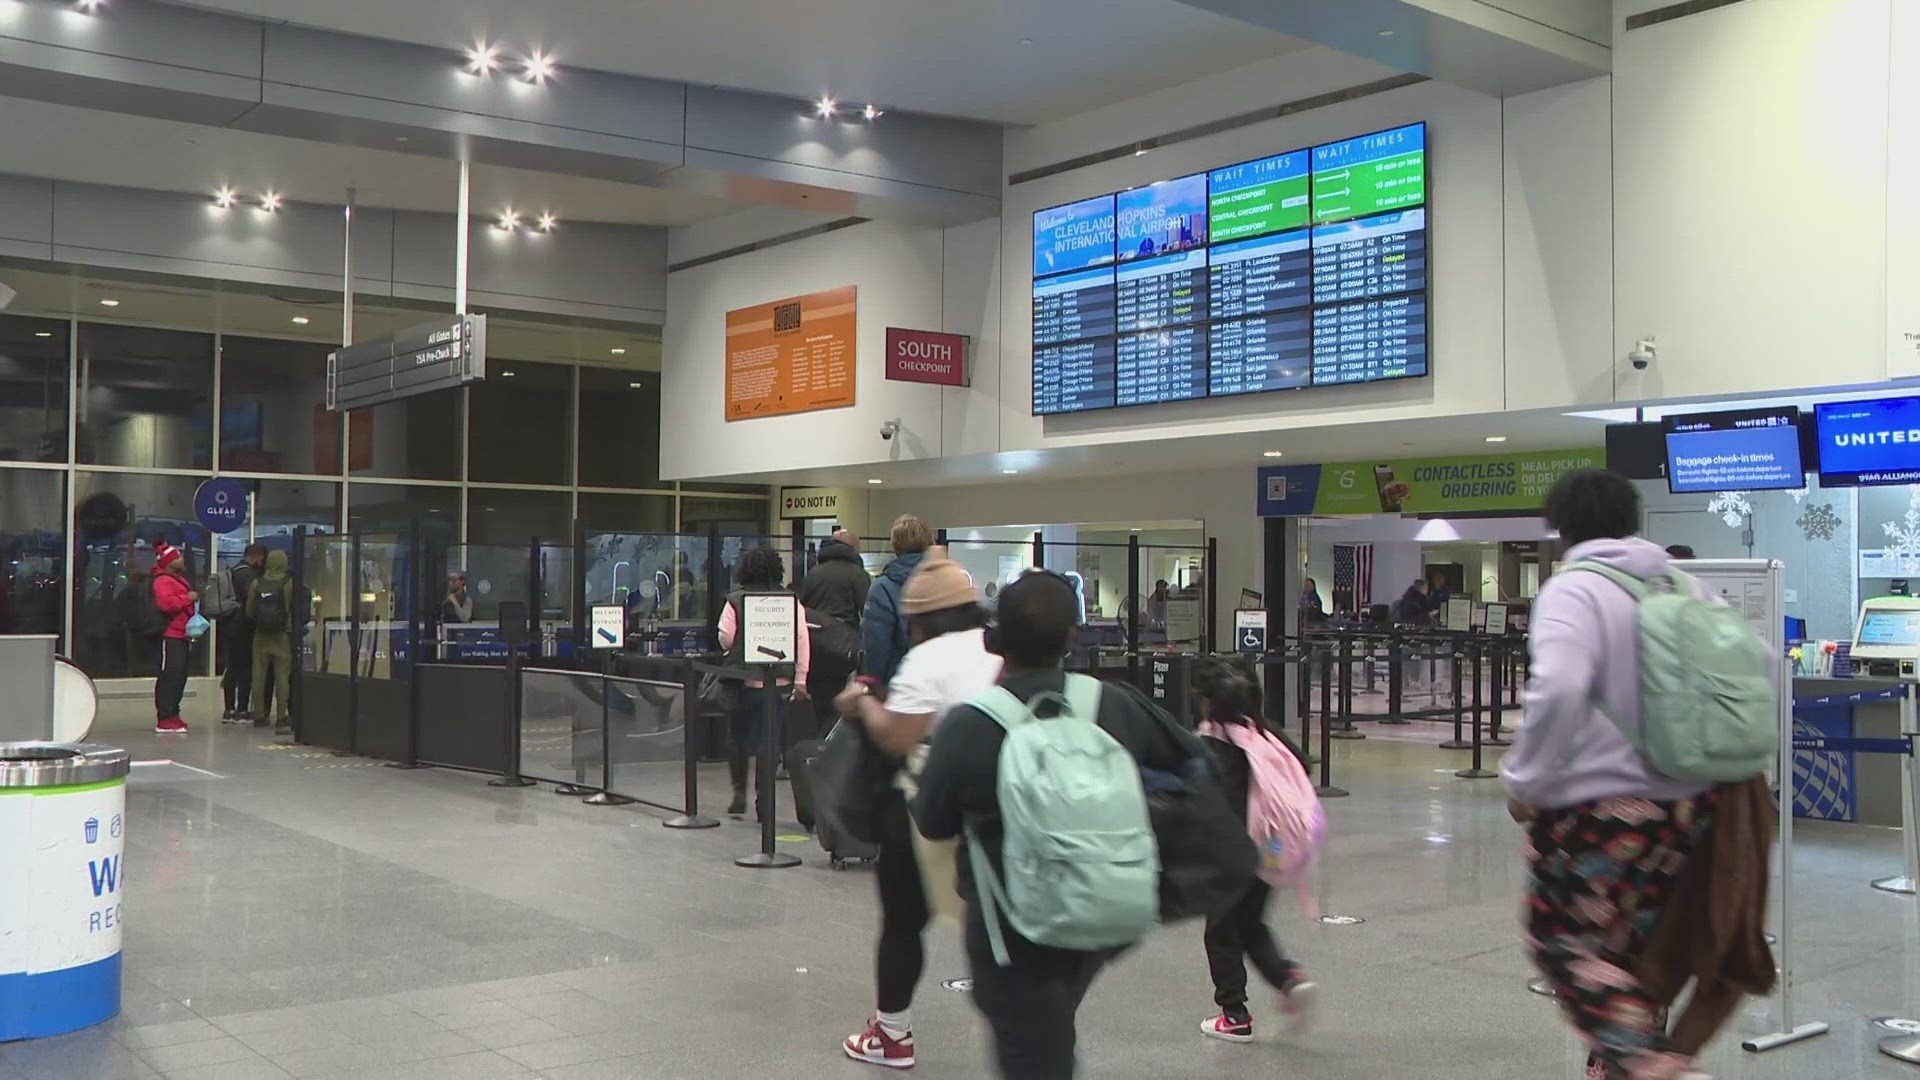 The city of Cleveland's timeline to overhaul Hopkins Airport hit a snag this month after airlines needed more time to study the project. Here's the latest.